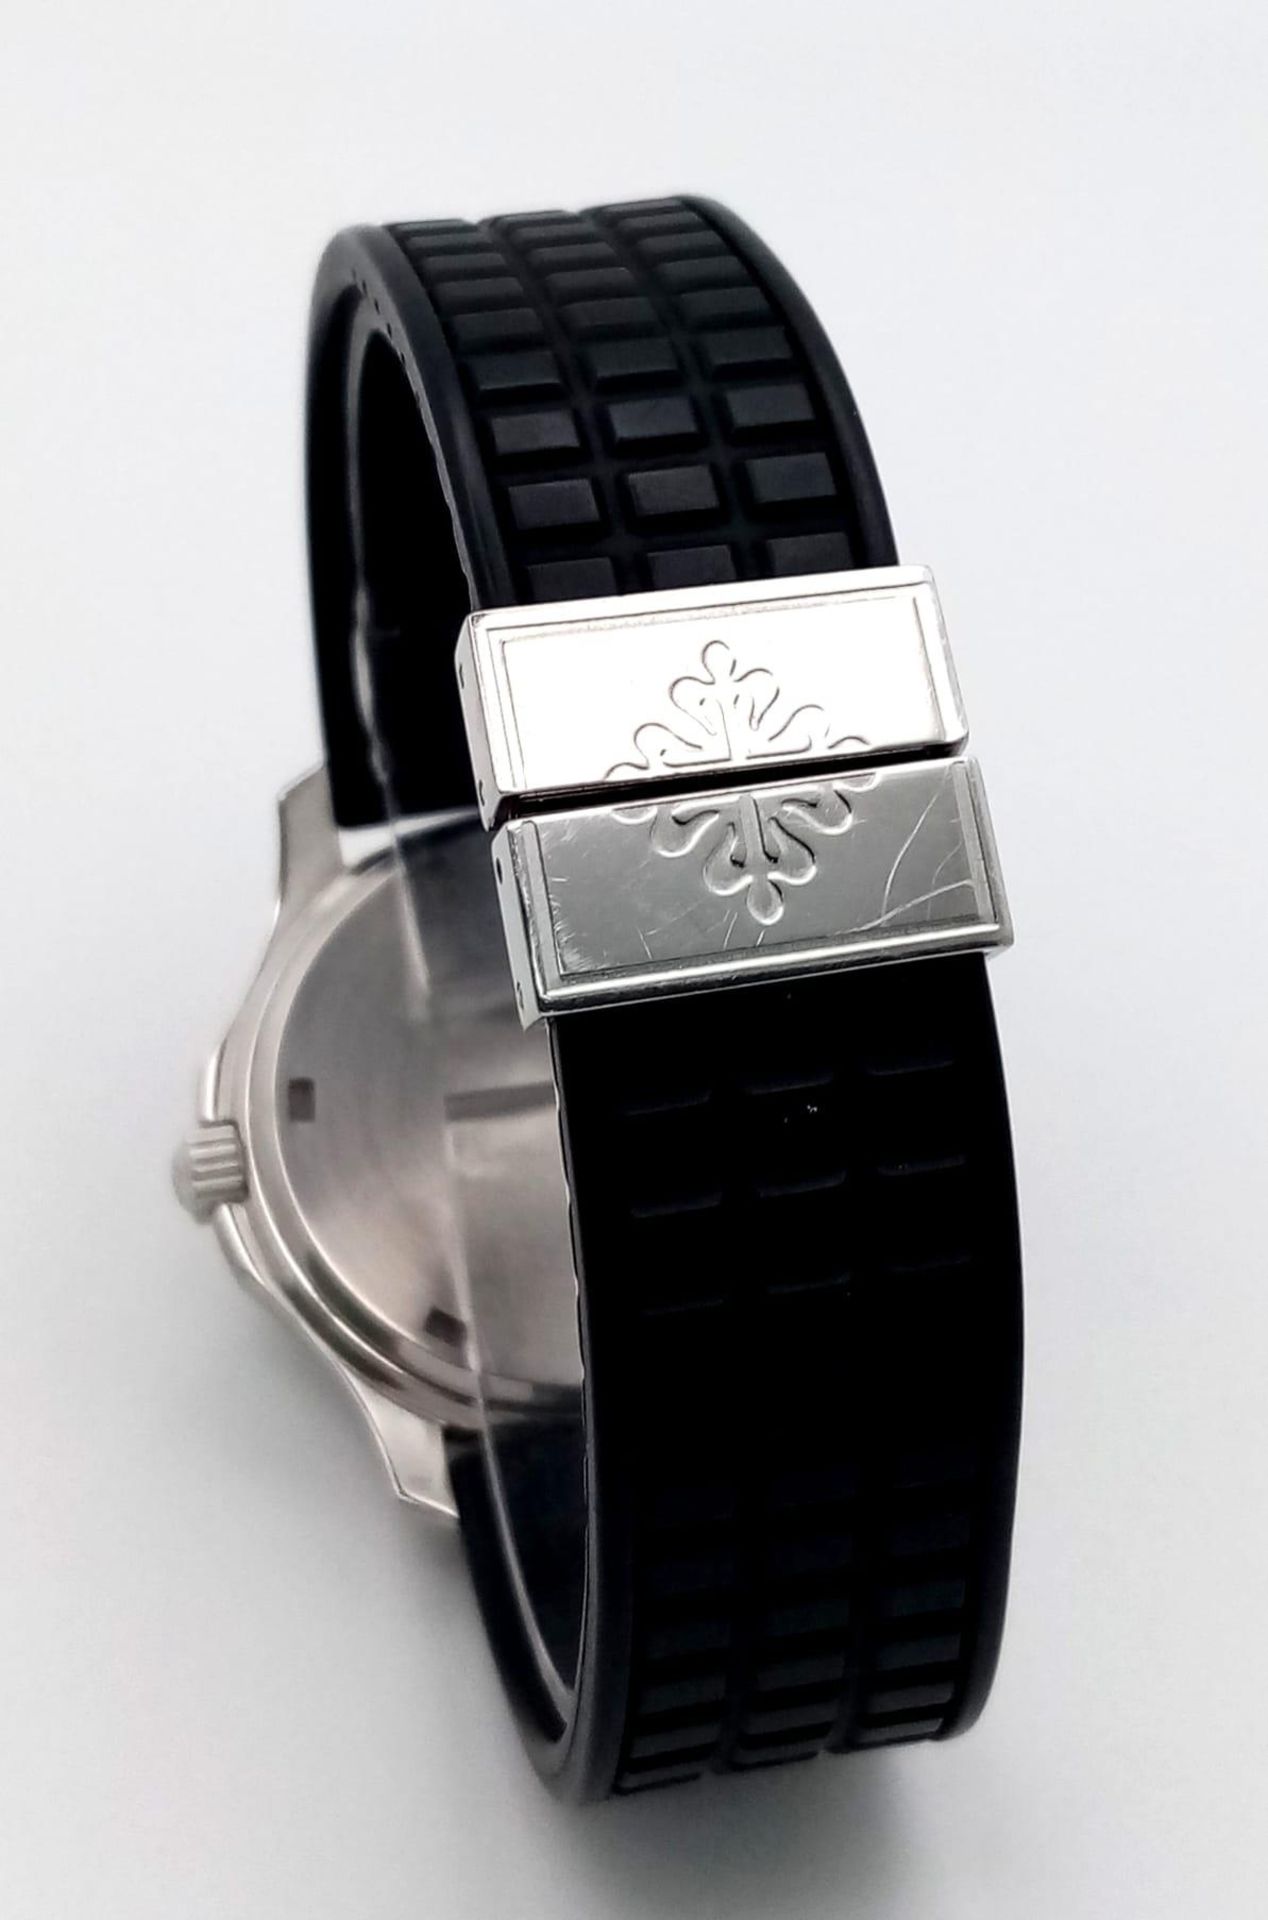 A Patek Phillippe Aquanaut Watch. Textured black rubber strap. Stainless steel case - 36mm. - Image 5 of 8